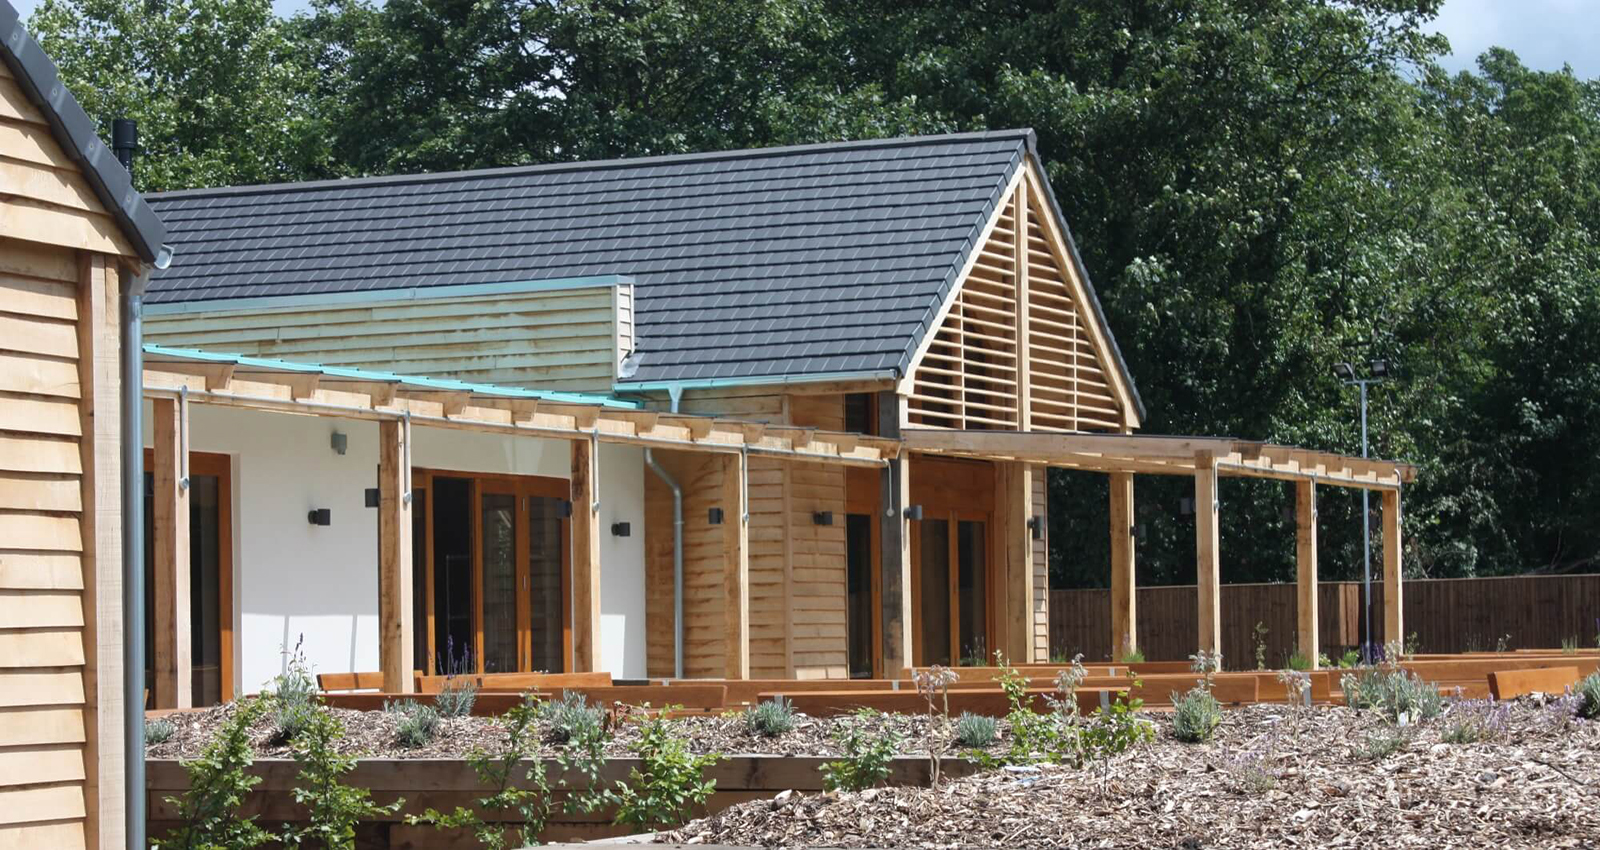 Is An Oak Framed Building Greener For The Environment?